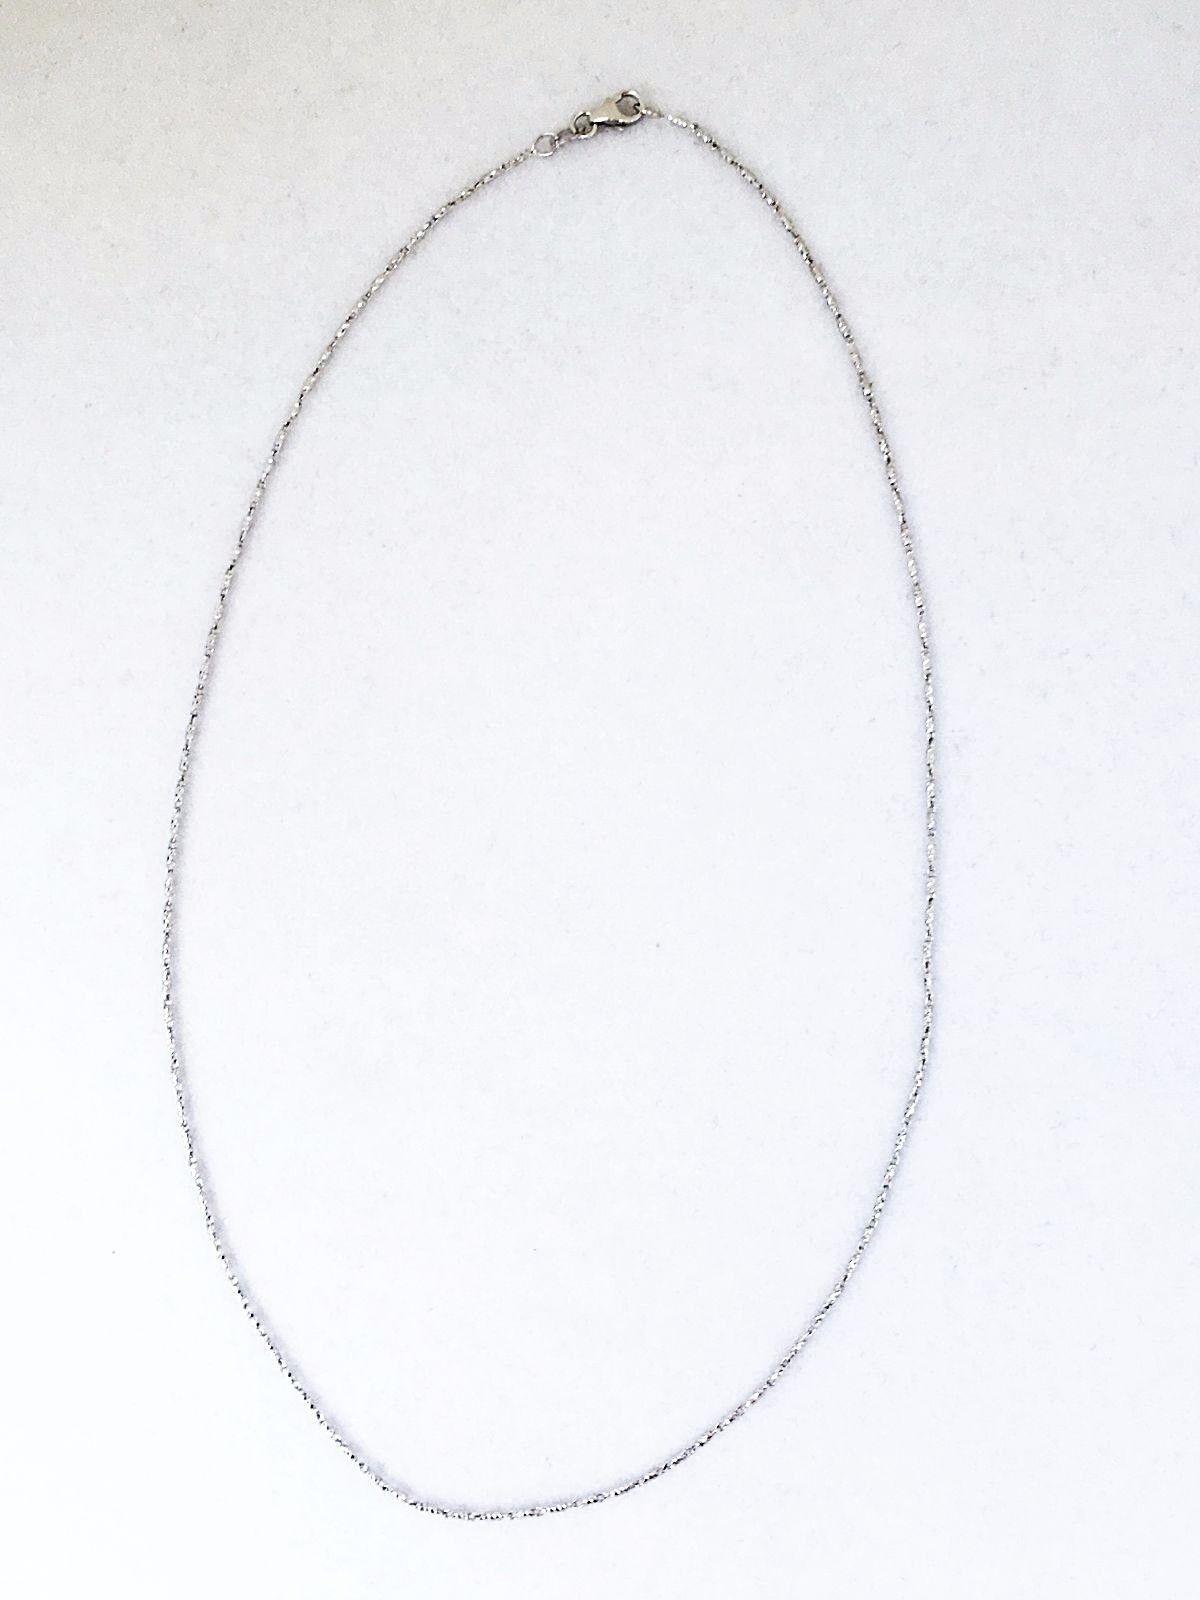 16 inch 14K white gold Raso chain, lobster clasp 3.1 grams 1.0 mm $420